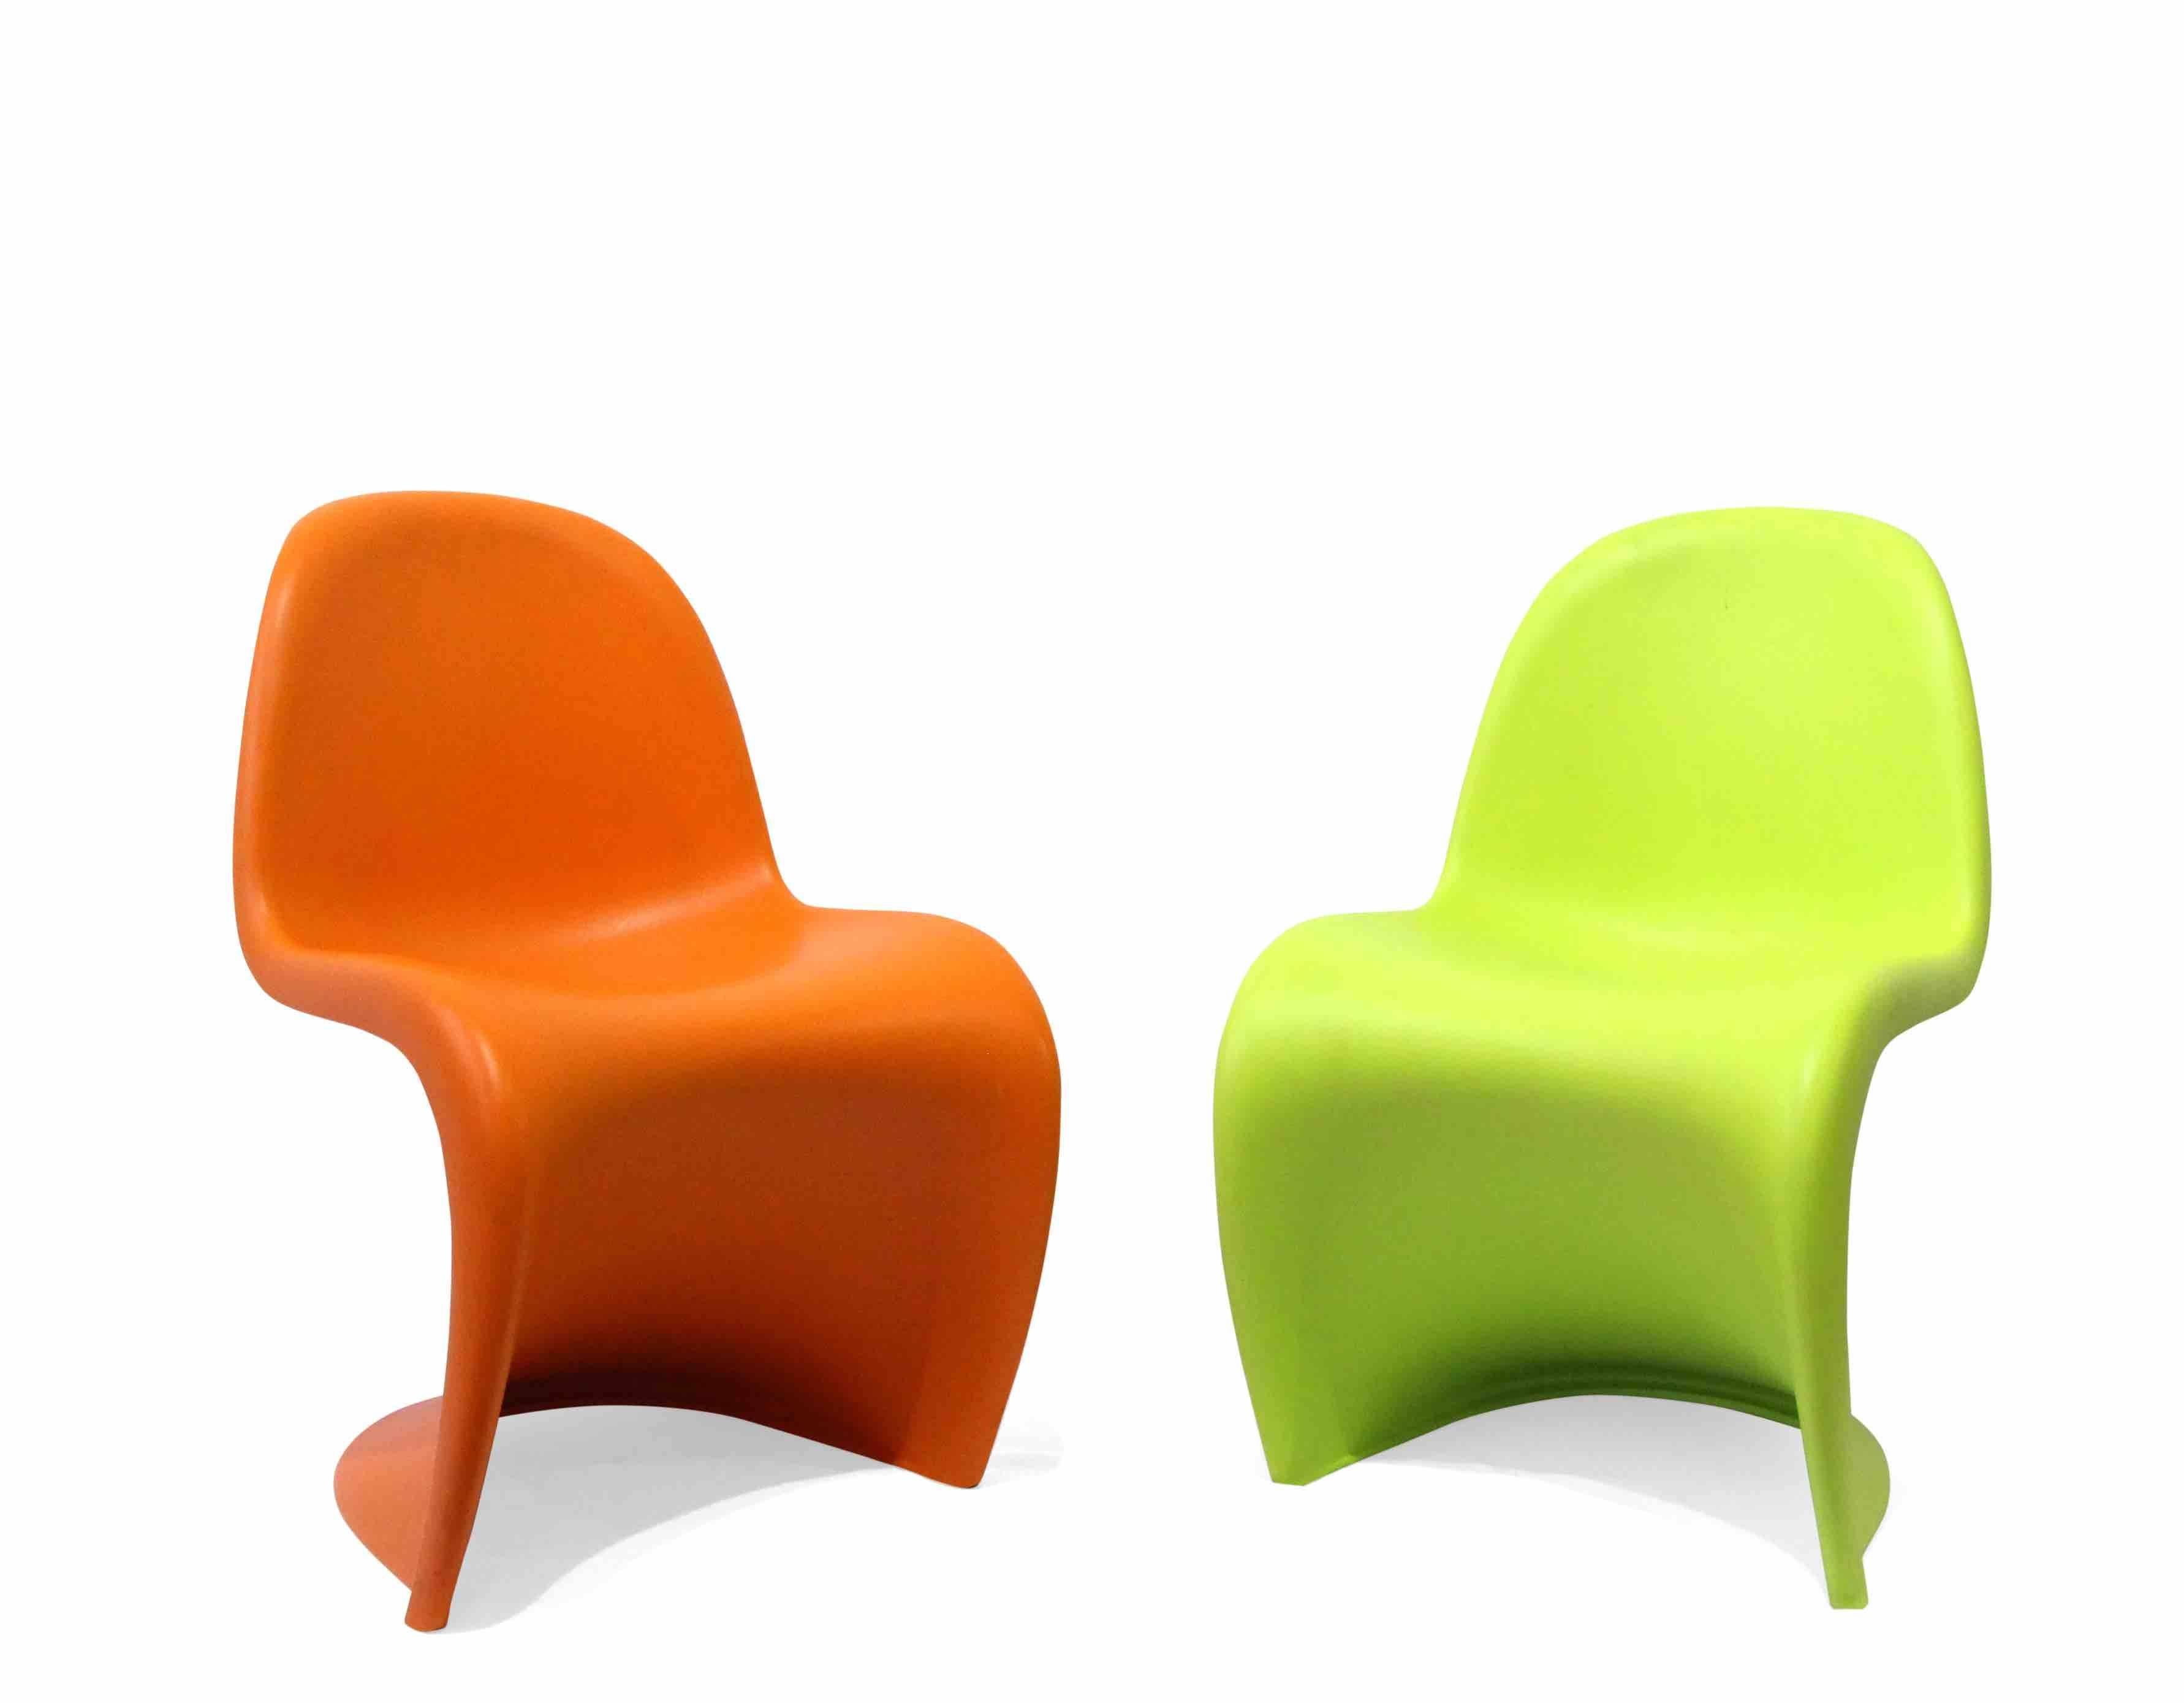 Four Orange and Green Junior Panton Chairs In Good Condition For Sale In Paris, FR